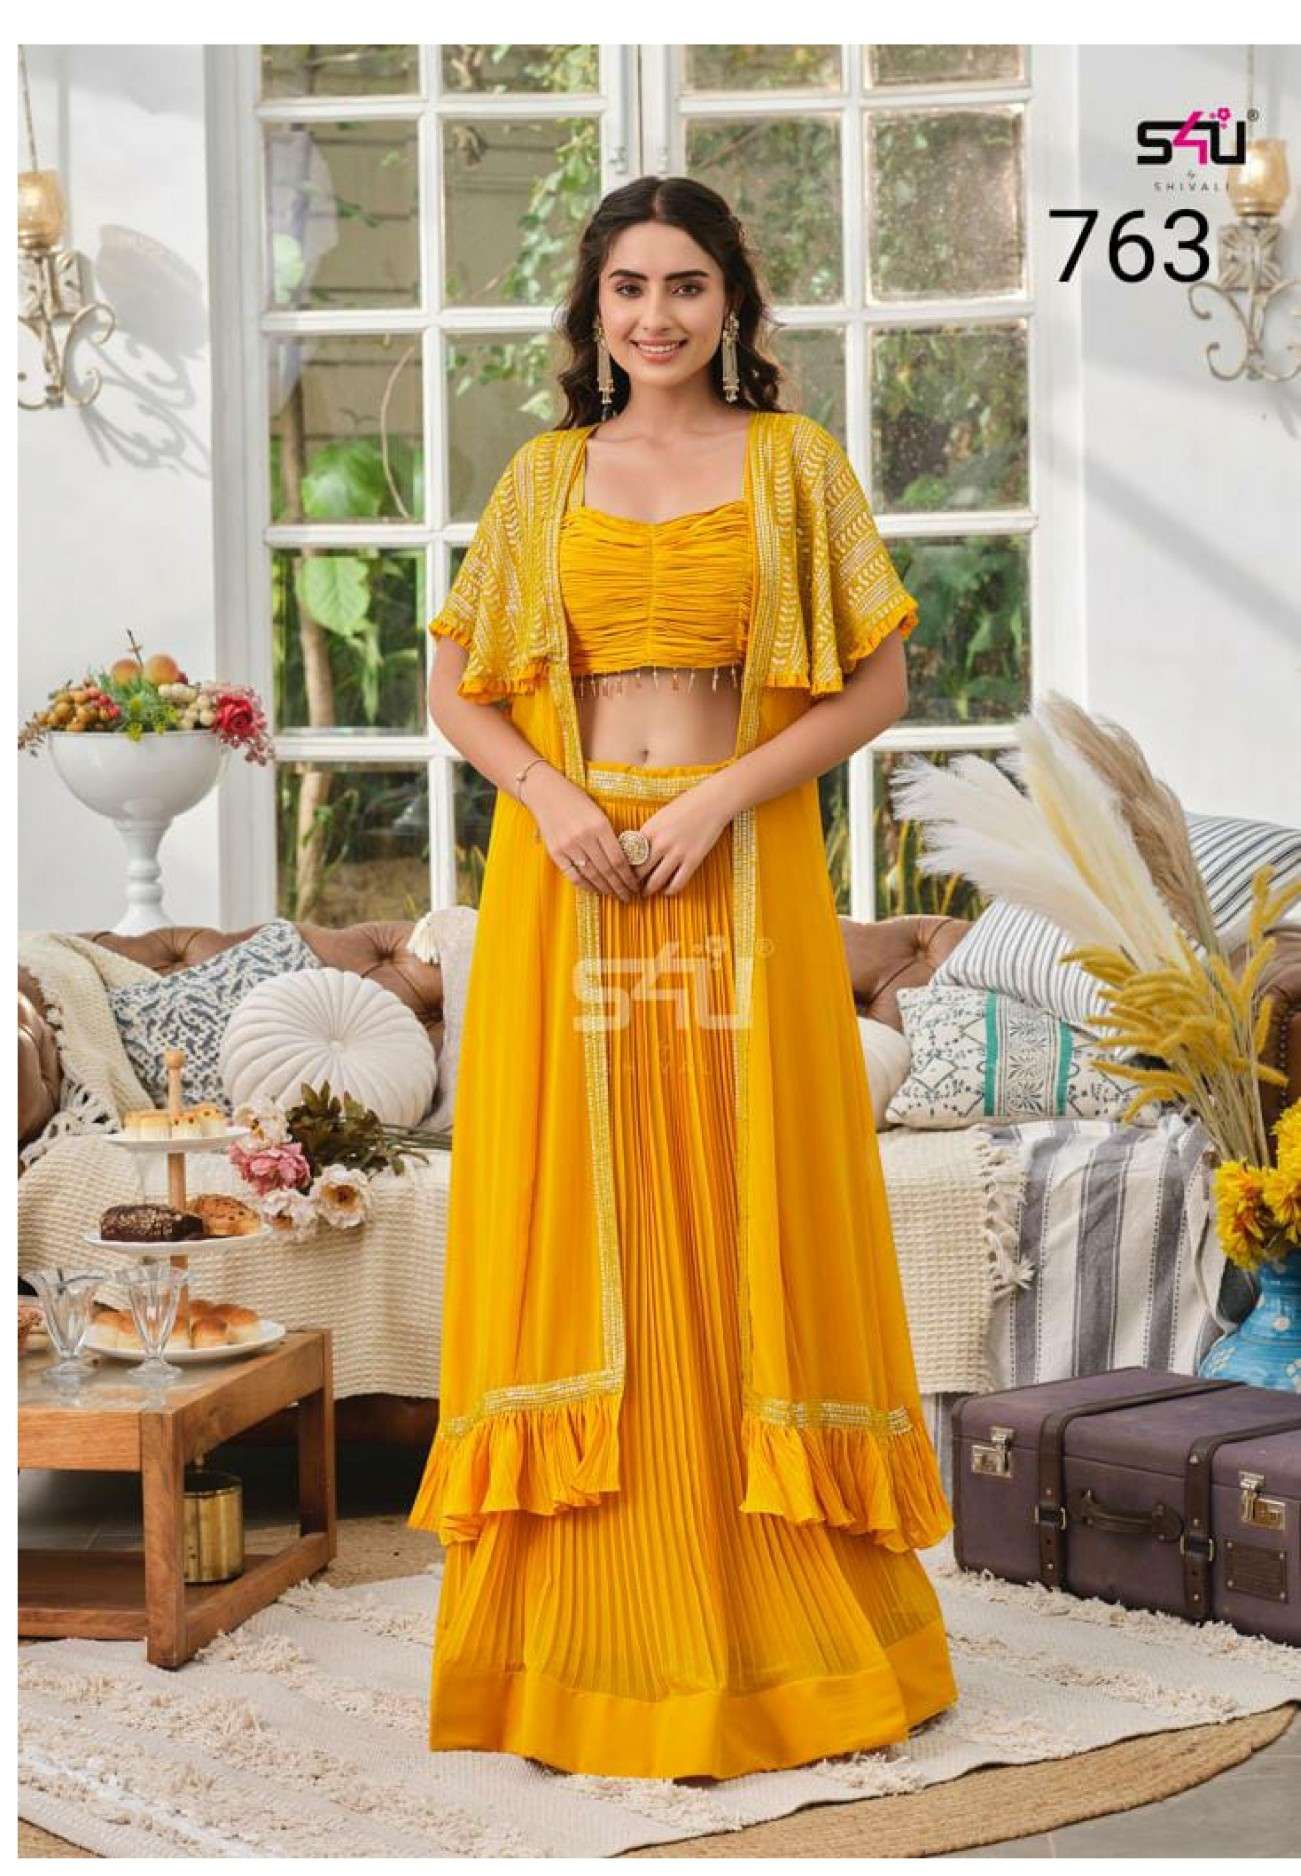 S4u 763 Yellow Colour Western Style Designer Readymade Suits...